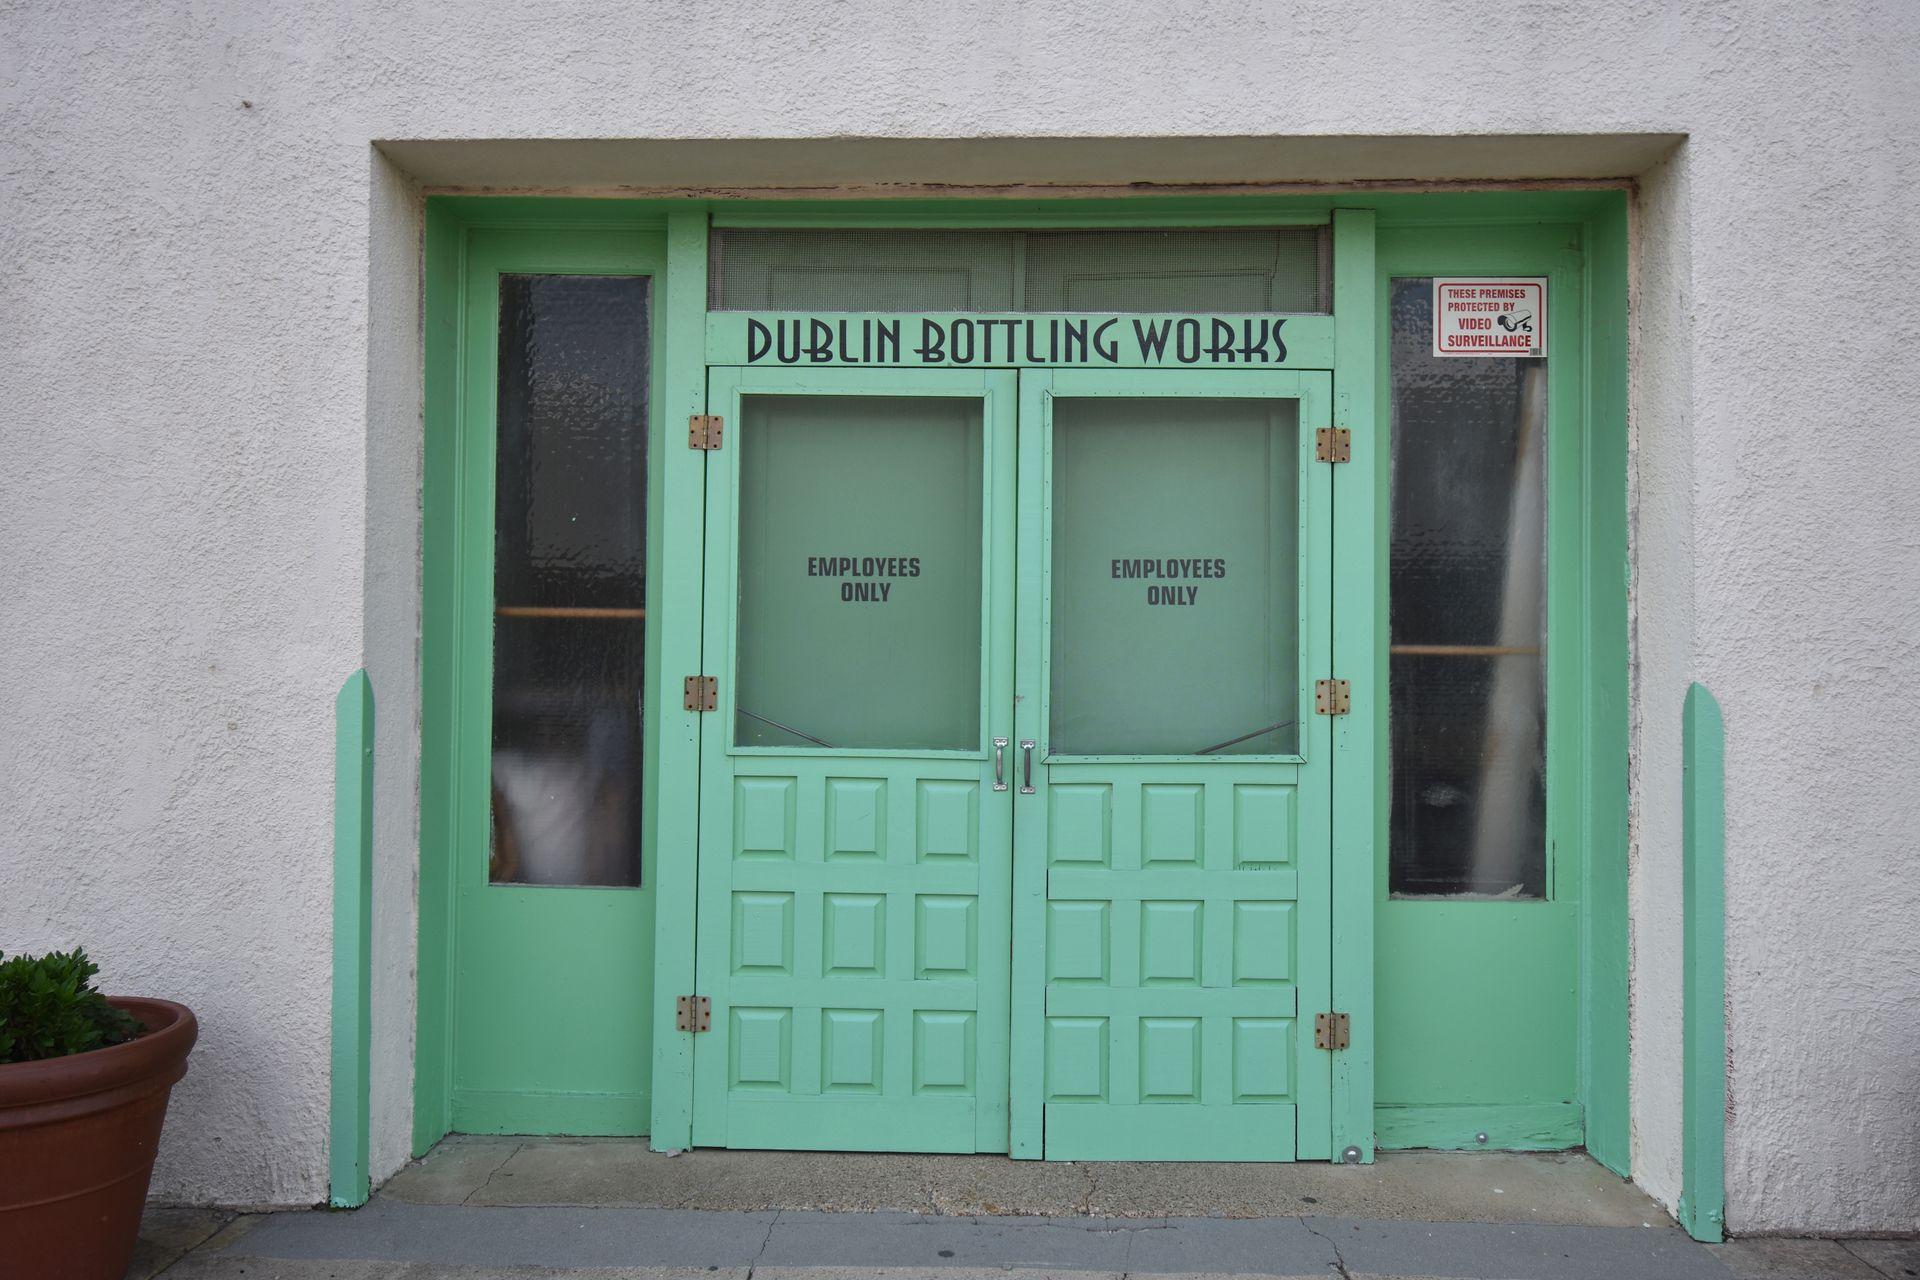 A set up green doors with the words "Dublin Bottling Works" above them. There are signs on the doors that say Employees Only